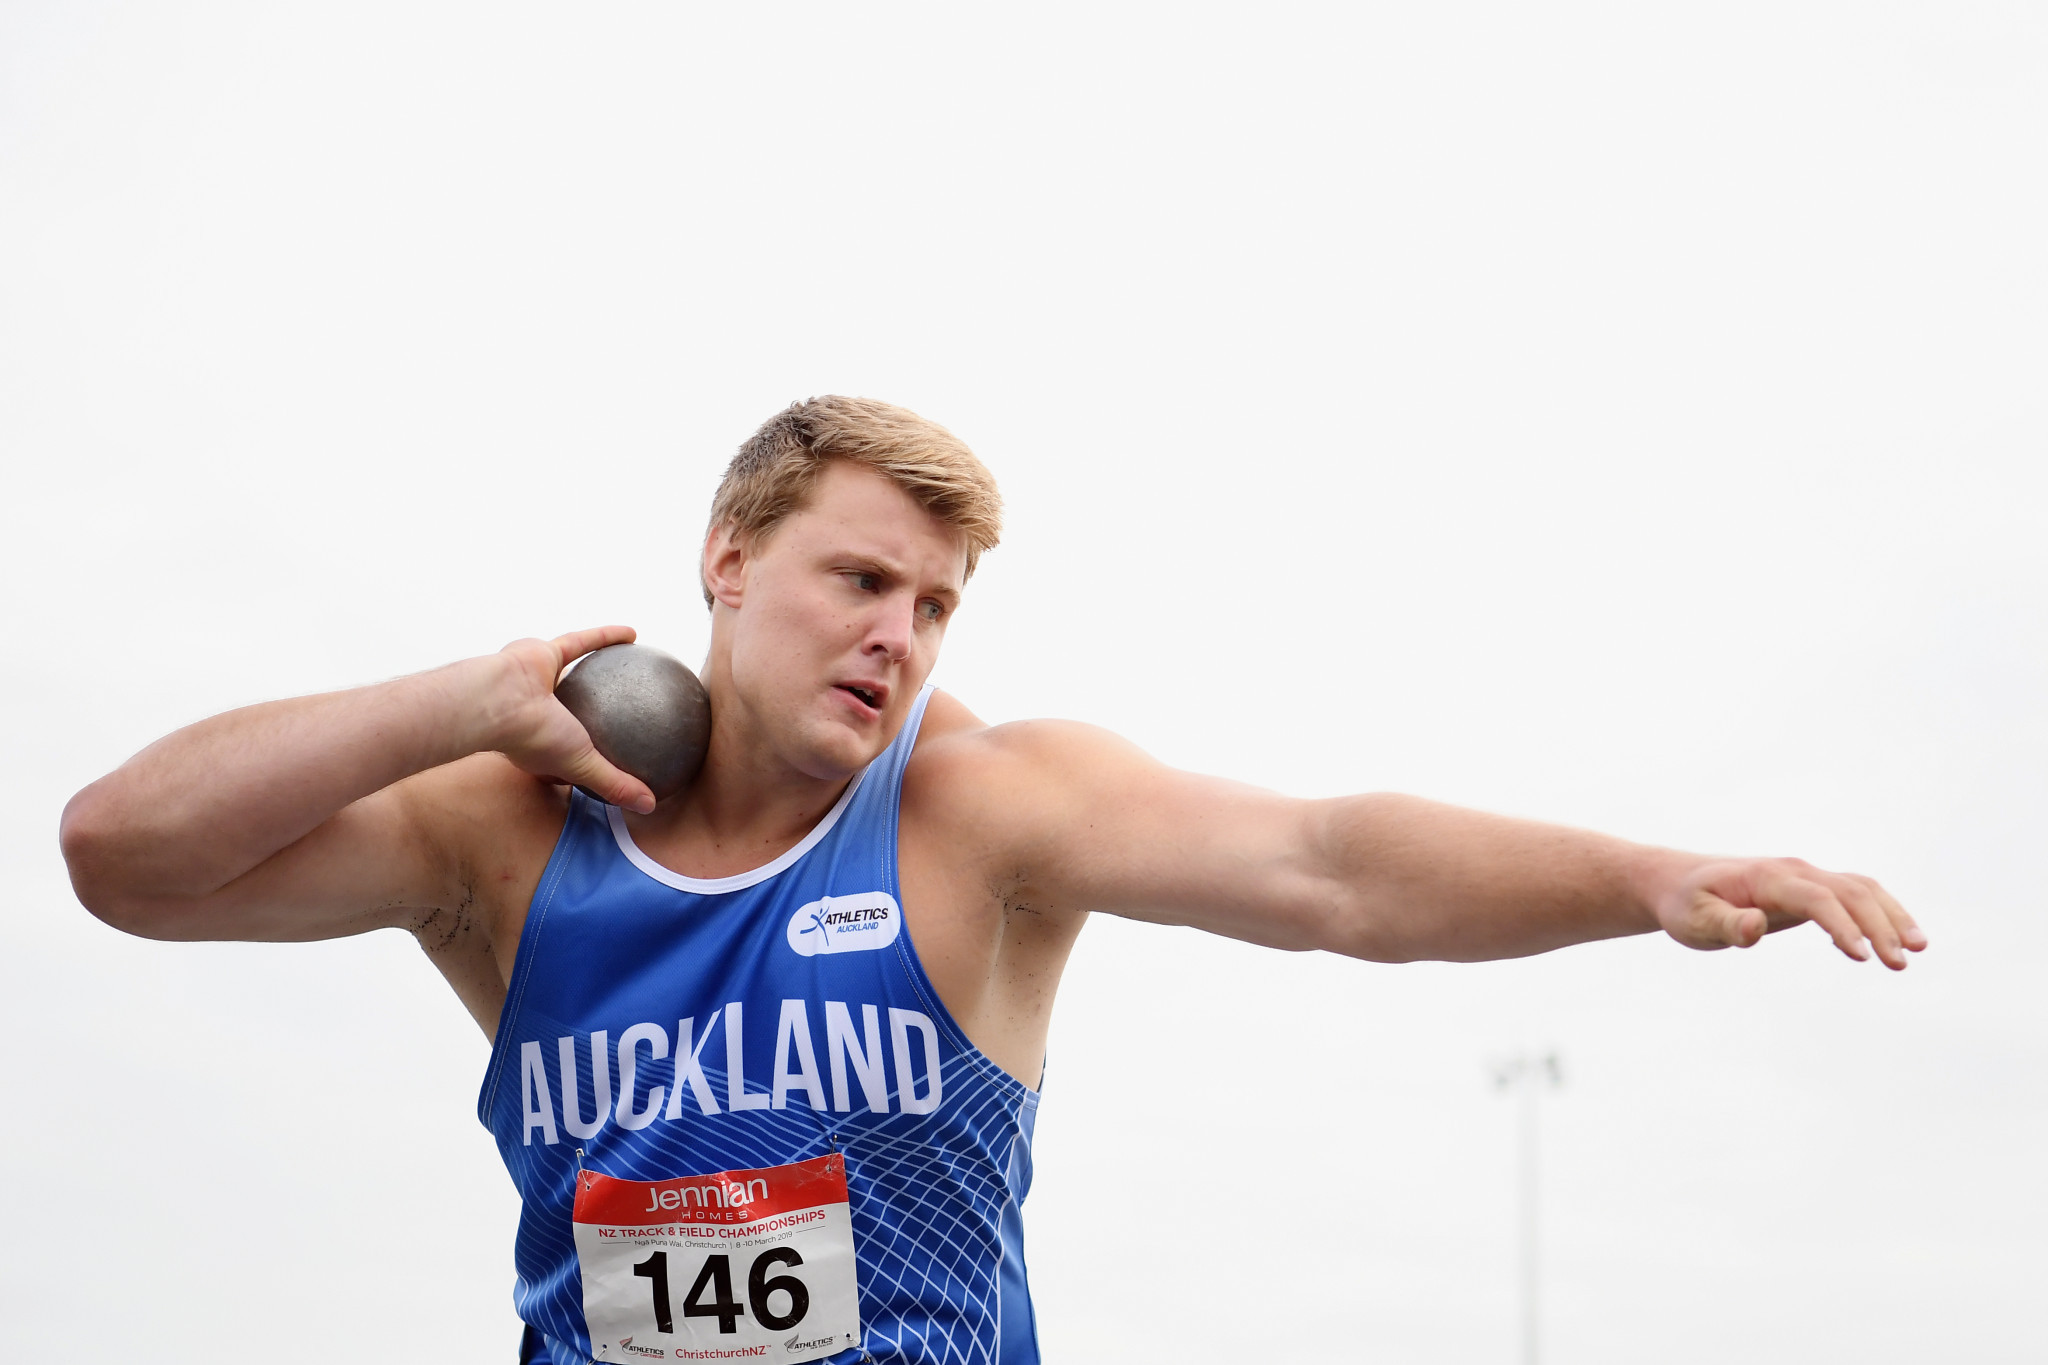 Jacko Gill bettered his own Championship record in taking the shot put gold medal with a distance of 20.75m ©Getty Images